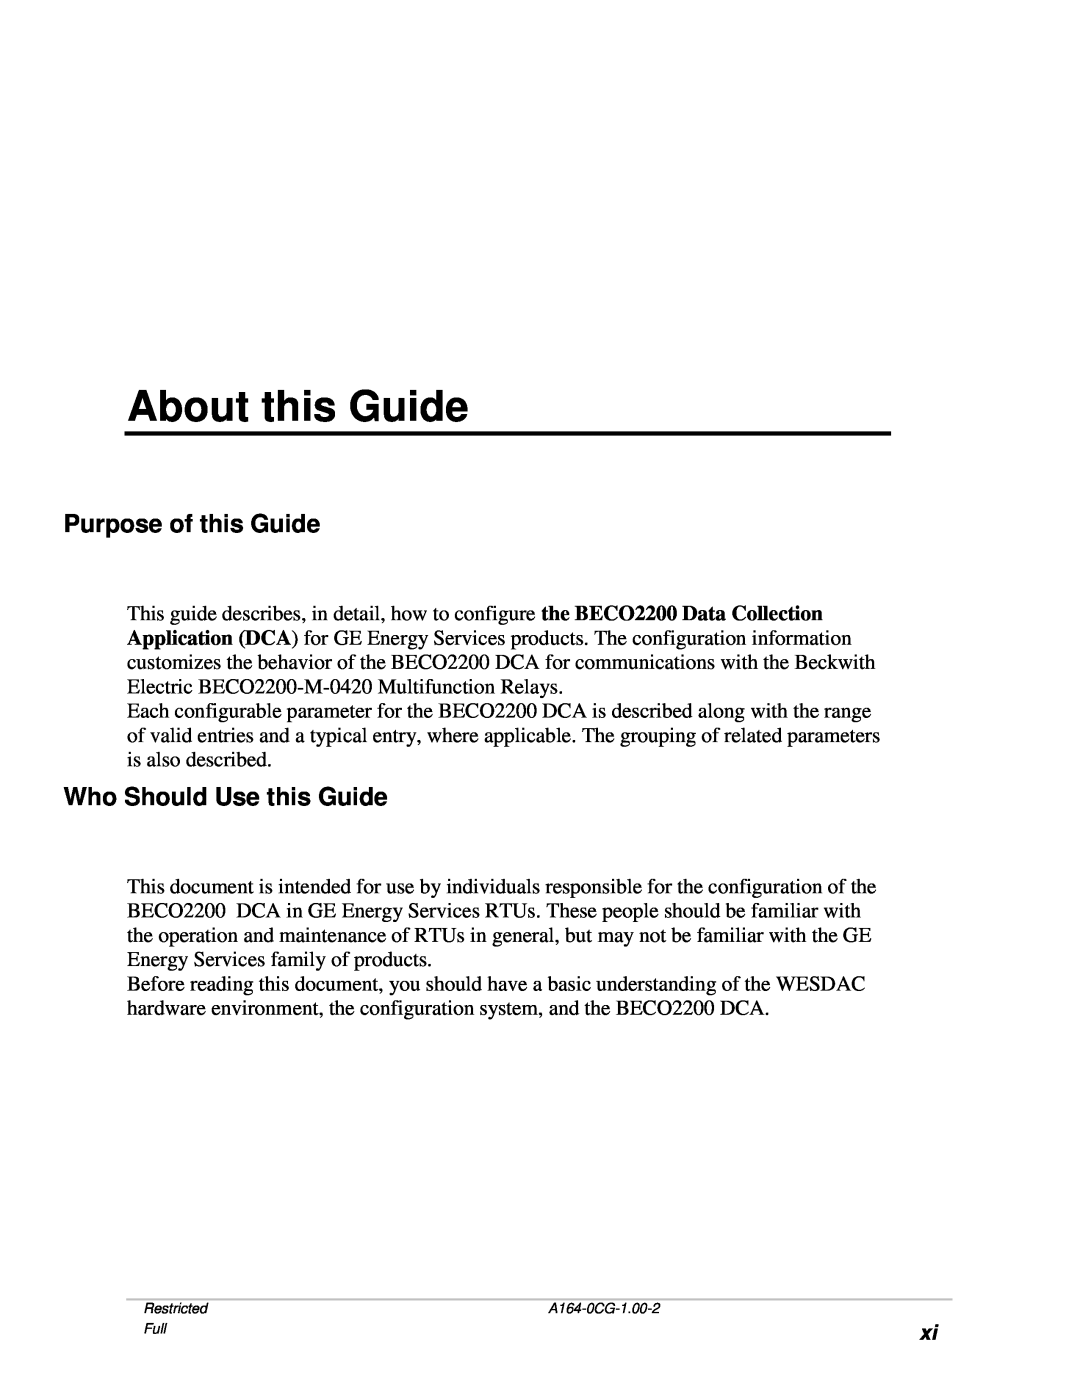 GE BECCO2200 manual About this Guide, Purpose of this Guide, Who Should Use this Guide 